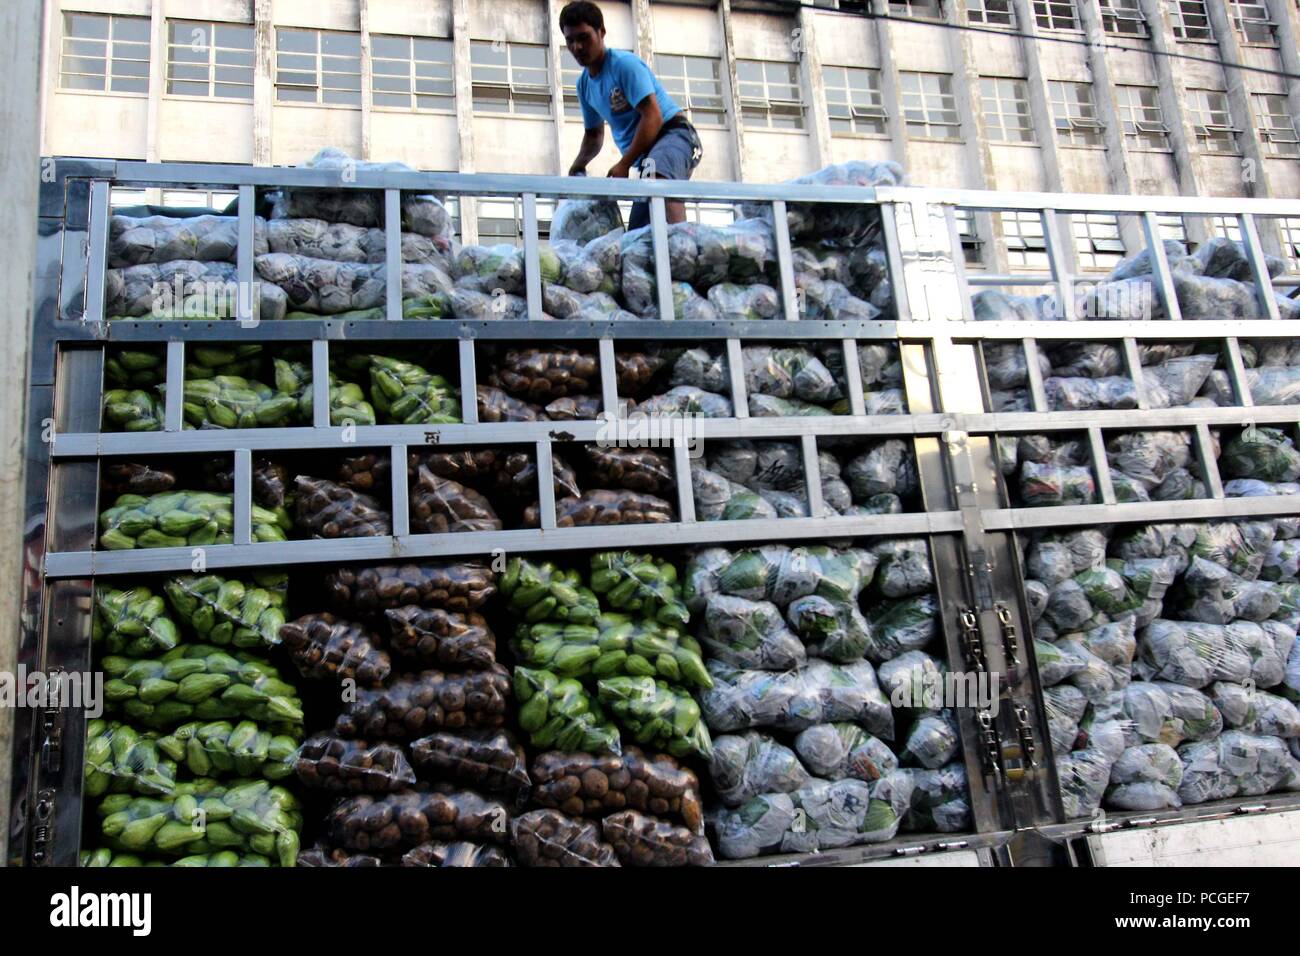 A vegetables vendor arranges their products along the street of Divisoria Market in Manila City on August 1, 2018. Divisoria Market is the Mother Market of all public market in Metro Manila which all products can be sold from dry products to wet market and even various types of appliances. Stock Photo